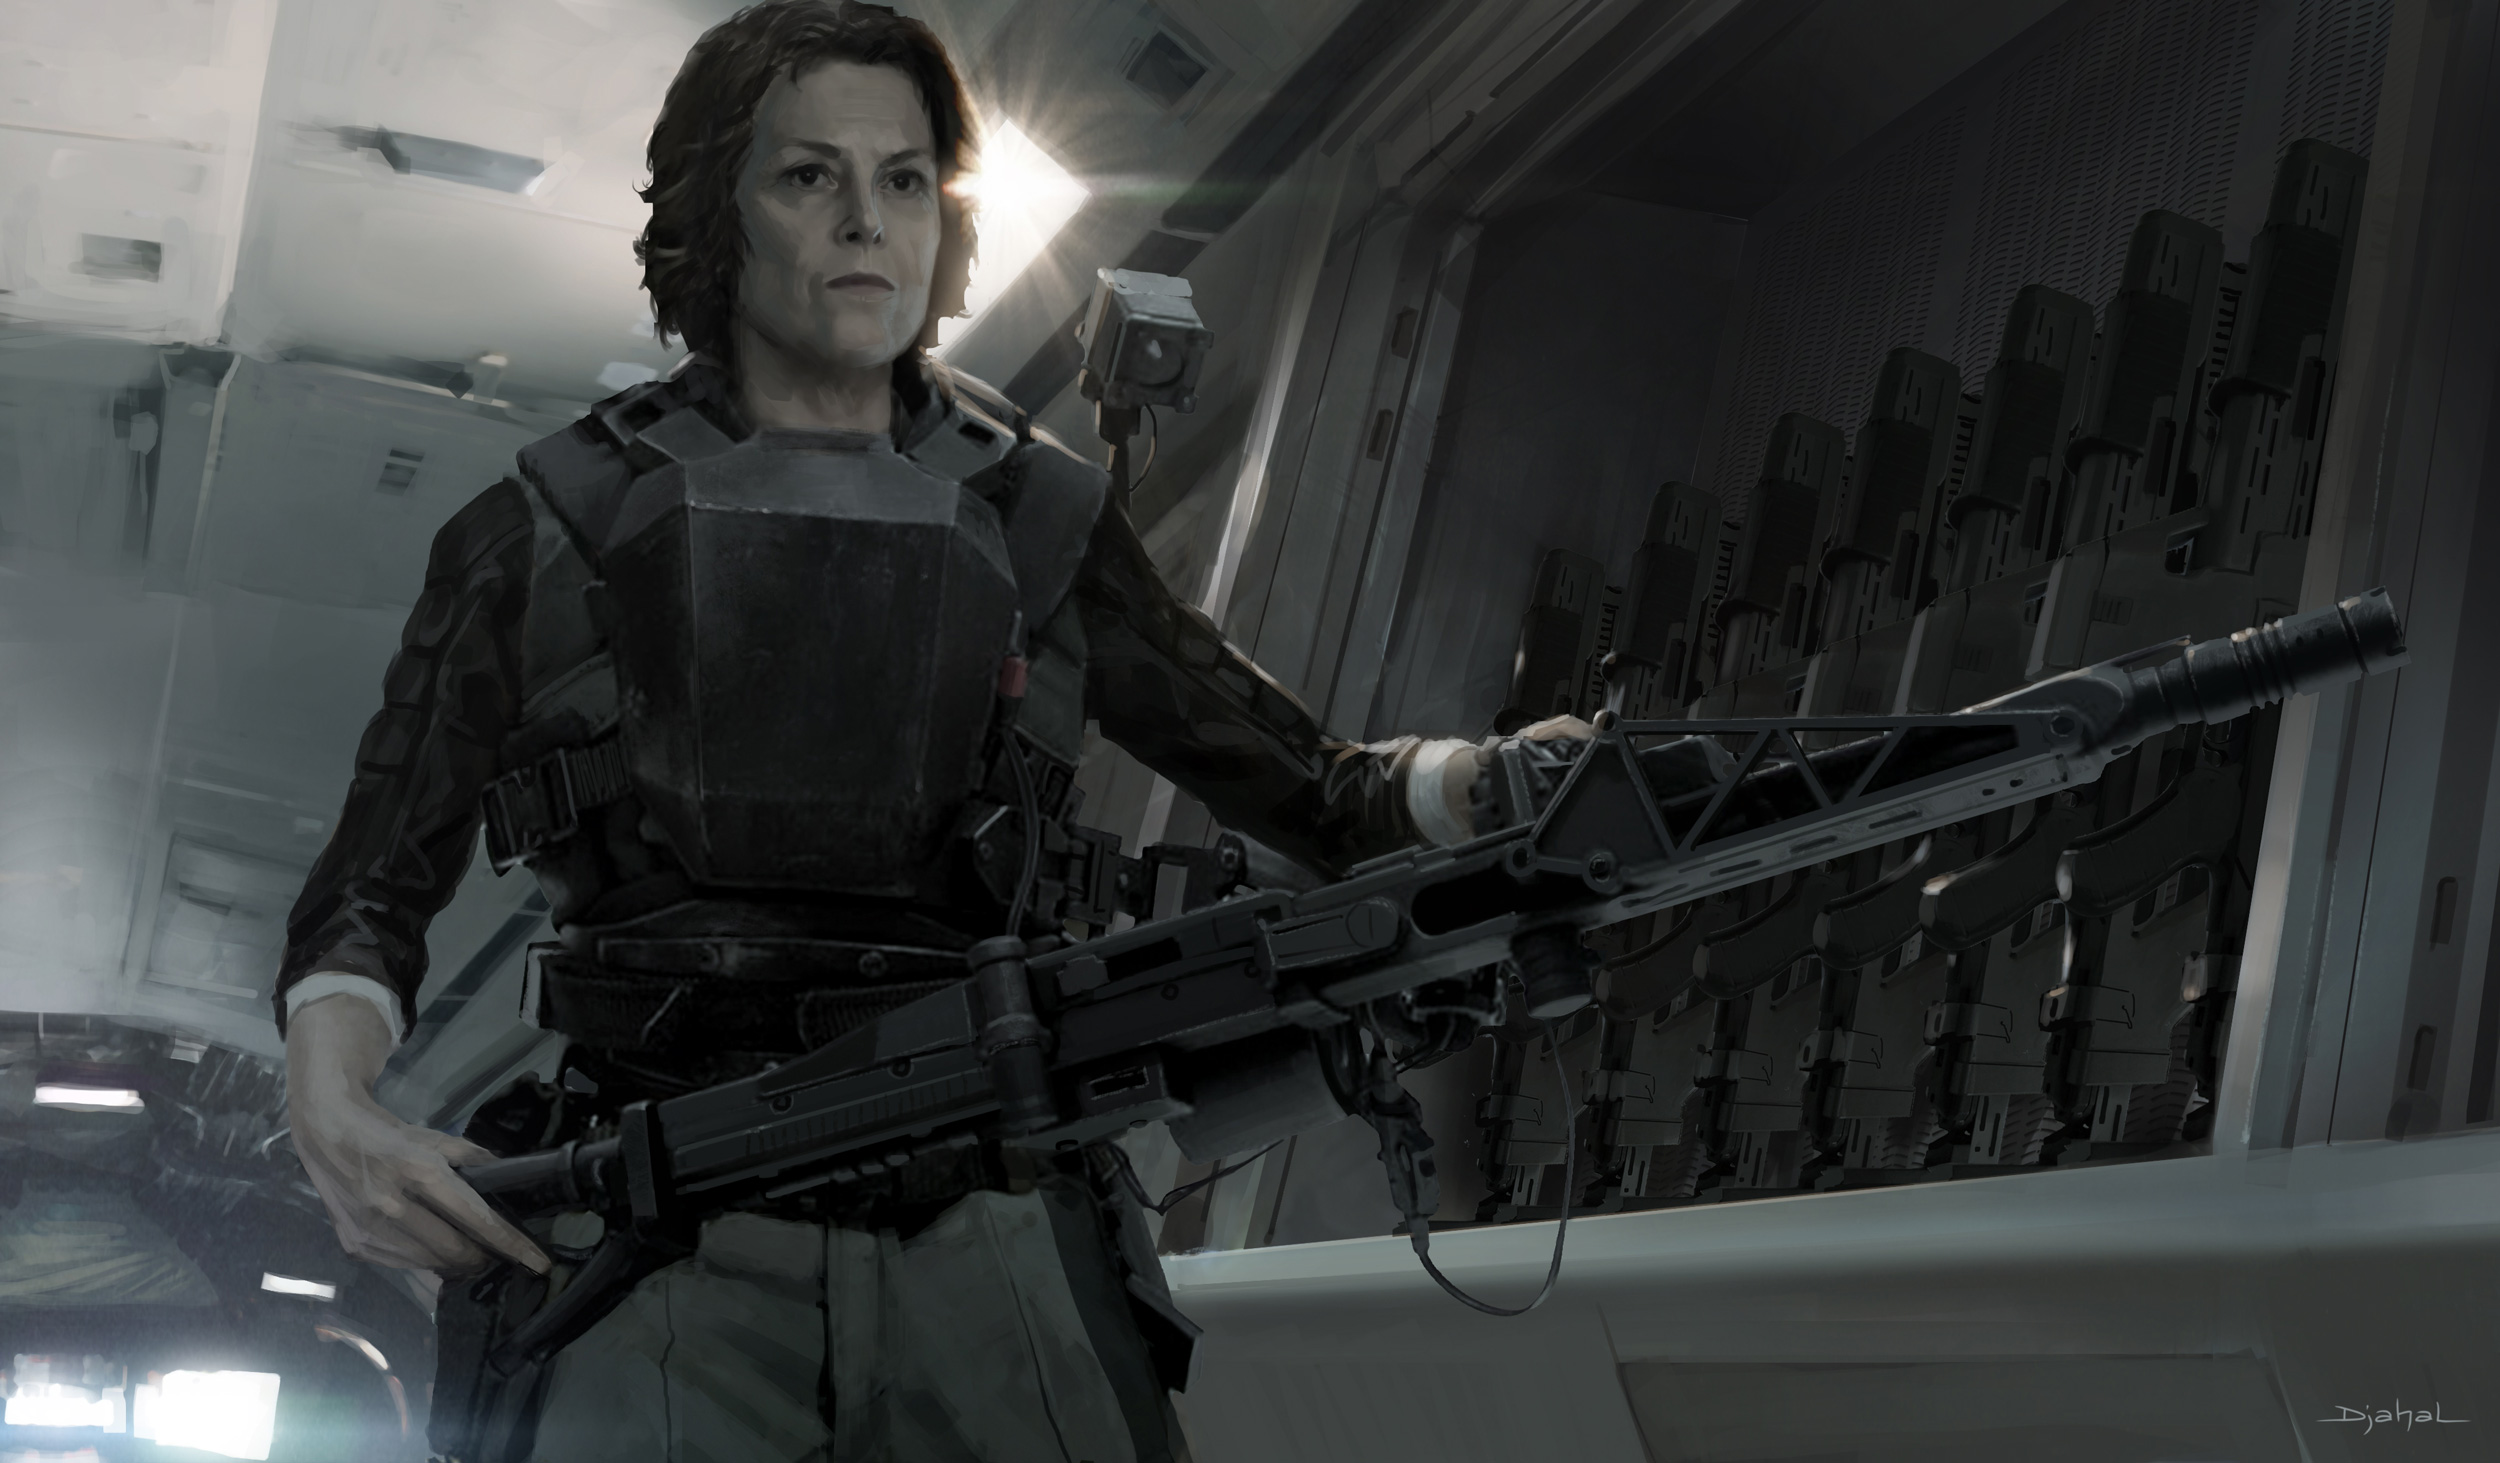 2015 | Ripley arms up in dropship